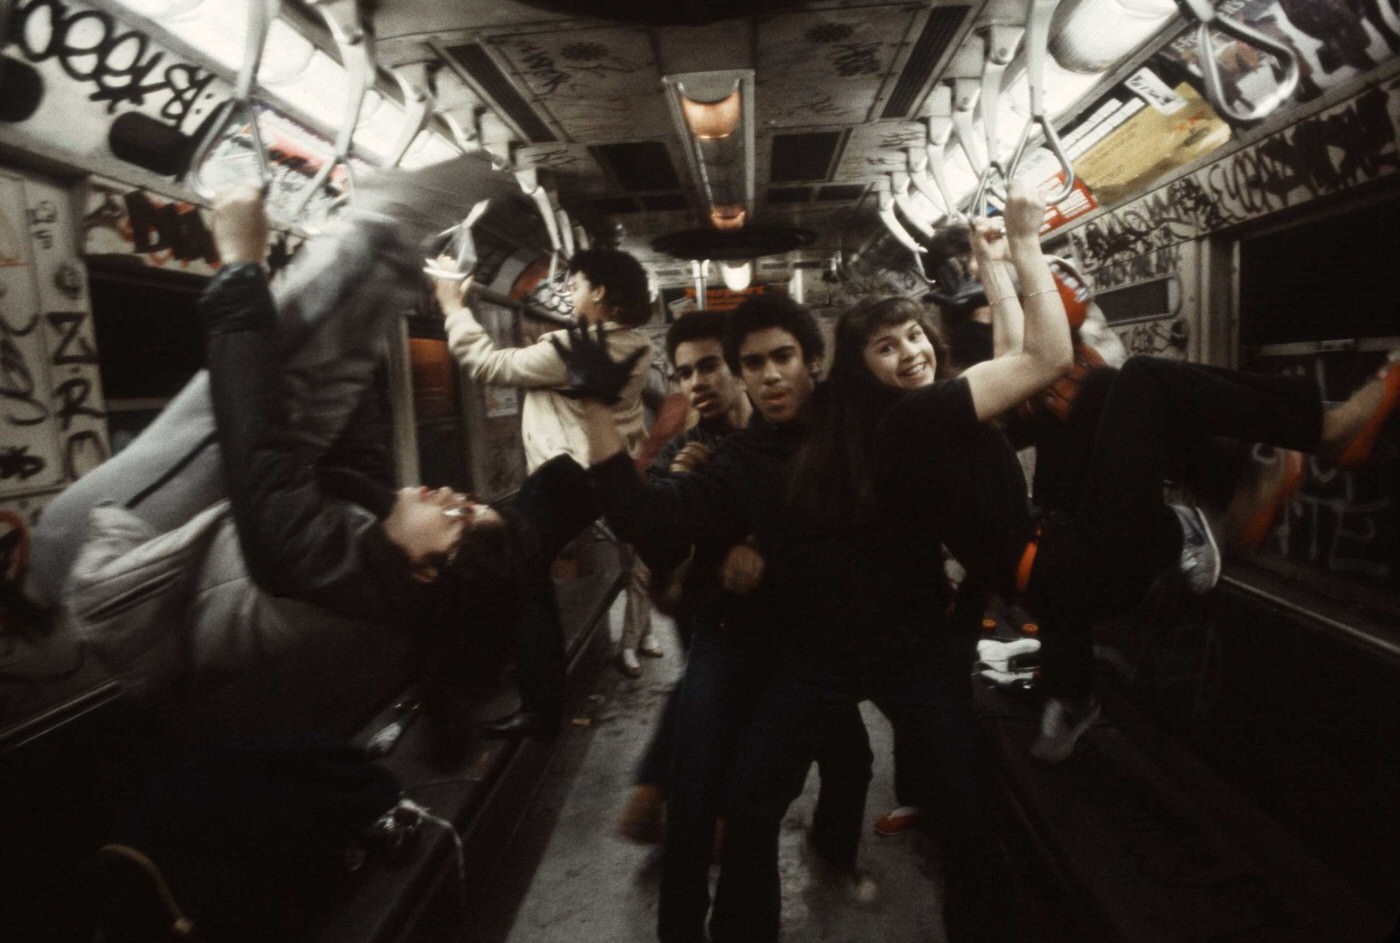 A Descent Into The Gritty Heart Of New York: Riding The Subway In 1981